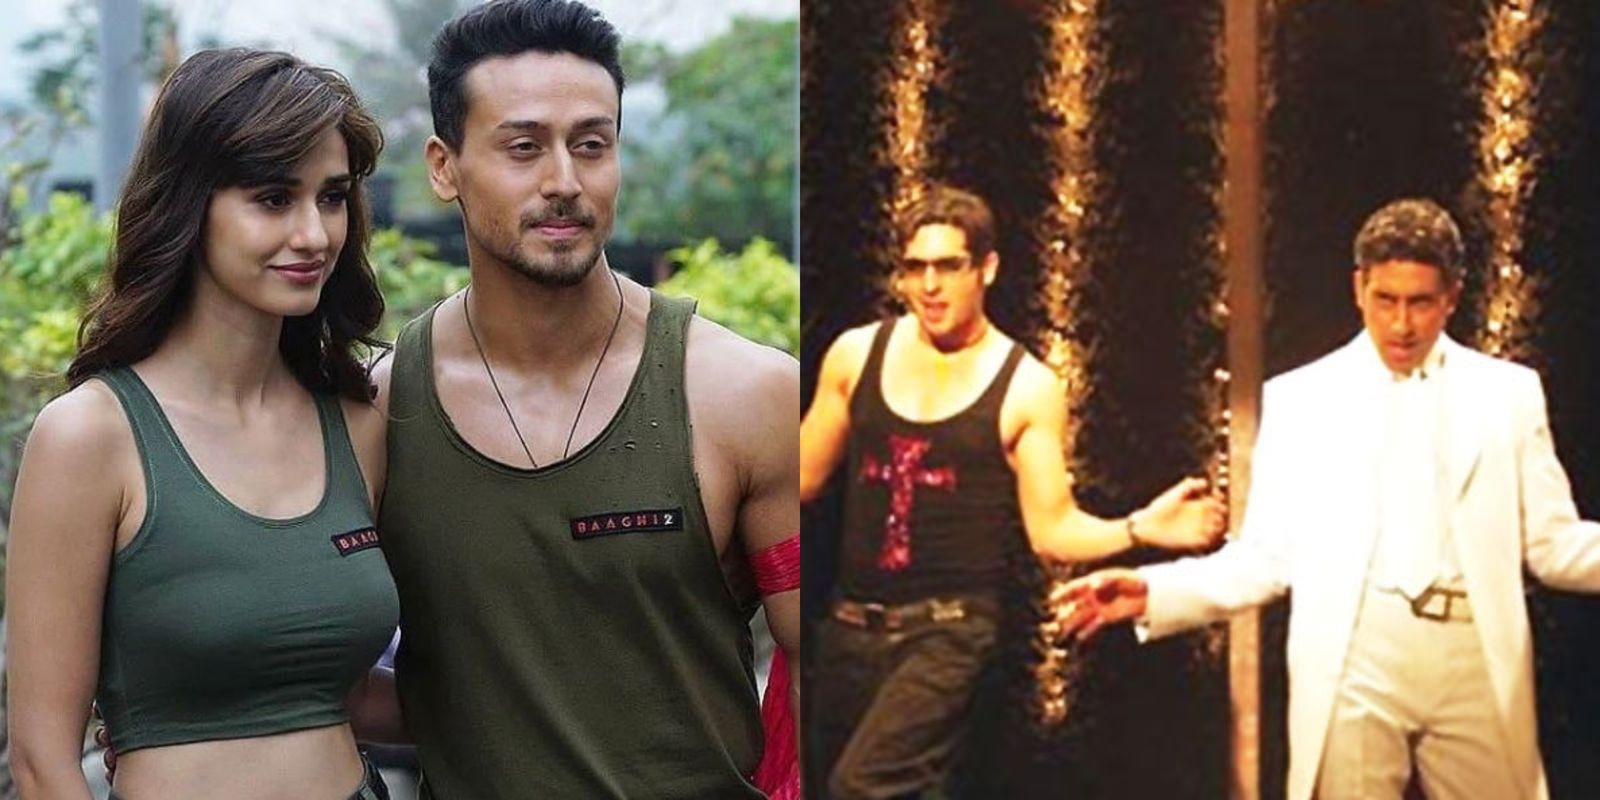 Disha Patani And Tiger Shroff To Dance Dus Bahane In Baaghi 3 As The Song Gets Recreated For The Film